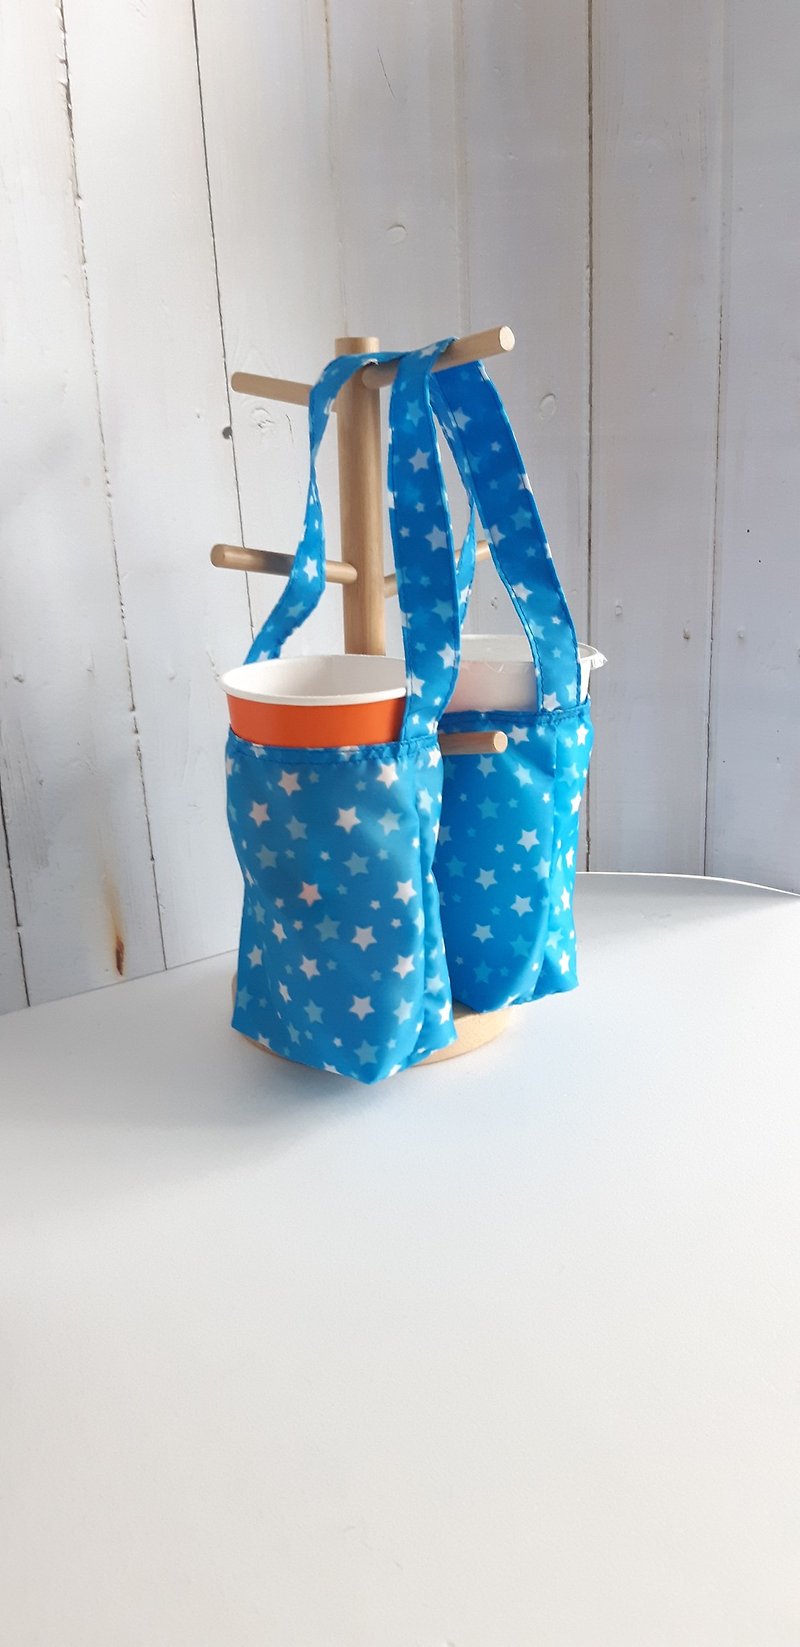 Star 2 with environmentally friendly waterproof beverage bag _2 cup can be 1 cup _ general size ice dam cup size - Beverage Holders & Bags - Waterproof Material 